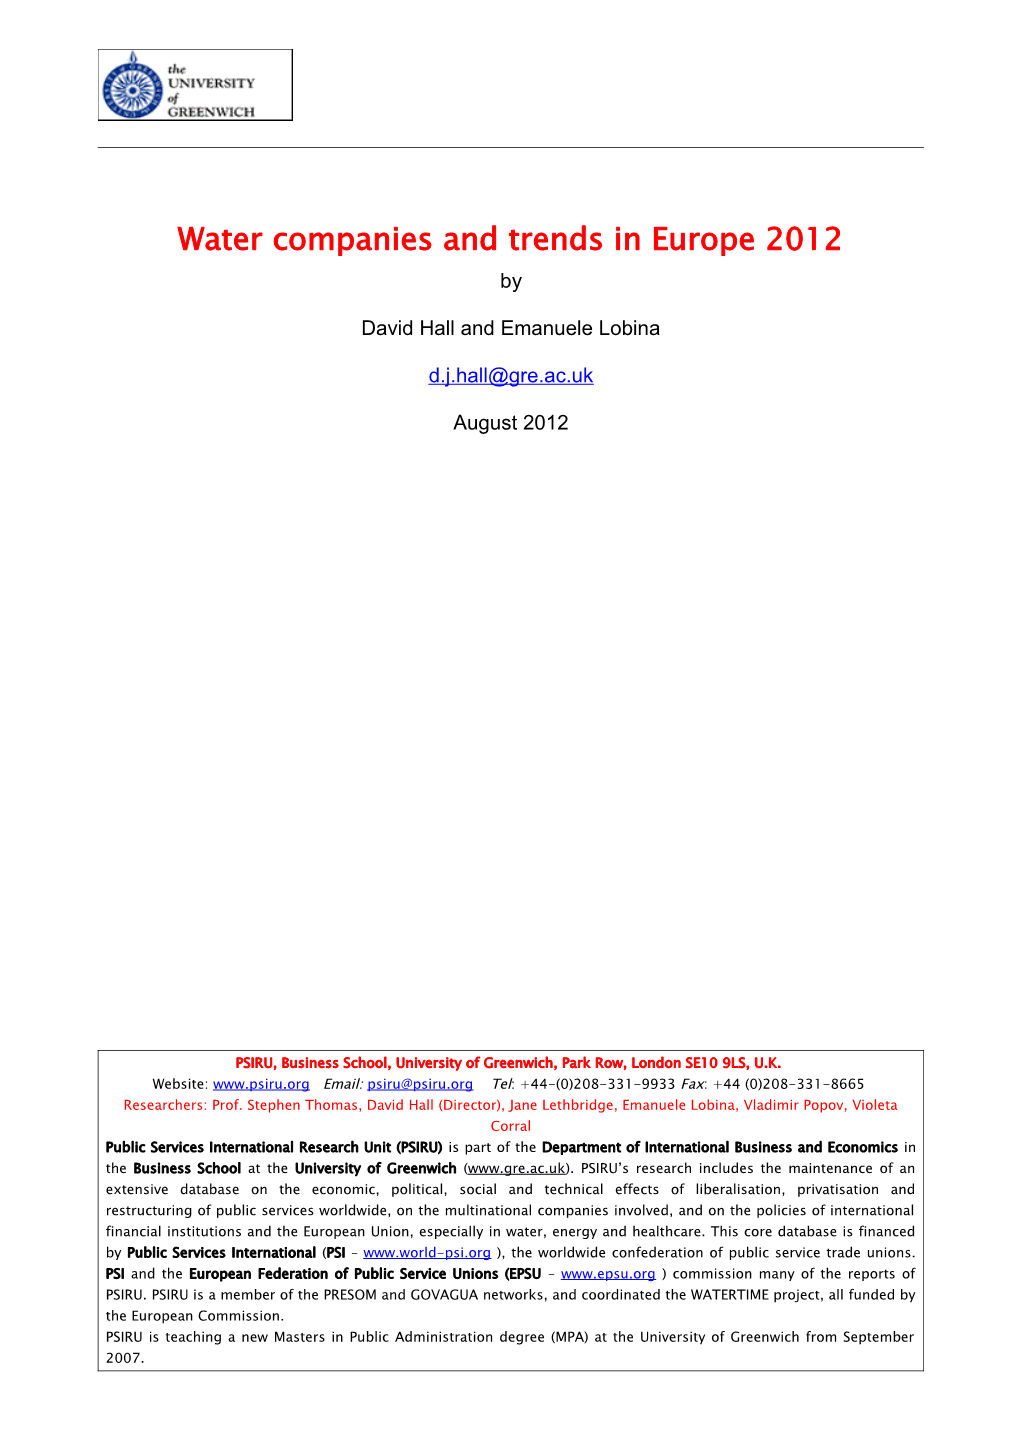 Water Companies and Trends in Europe 2012